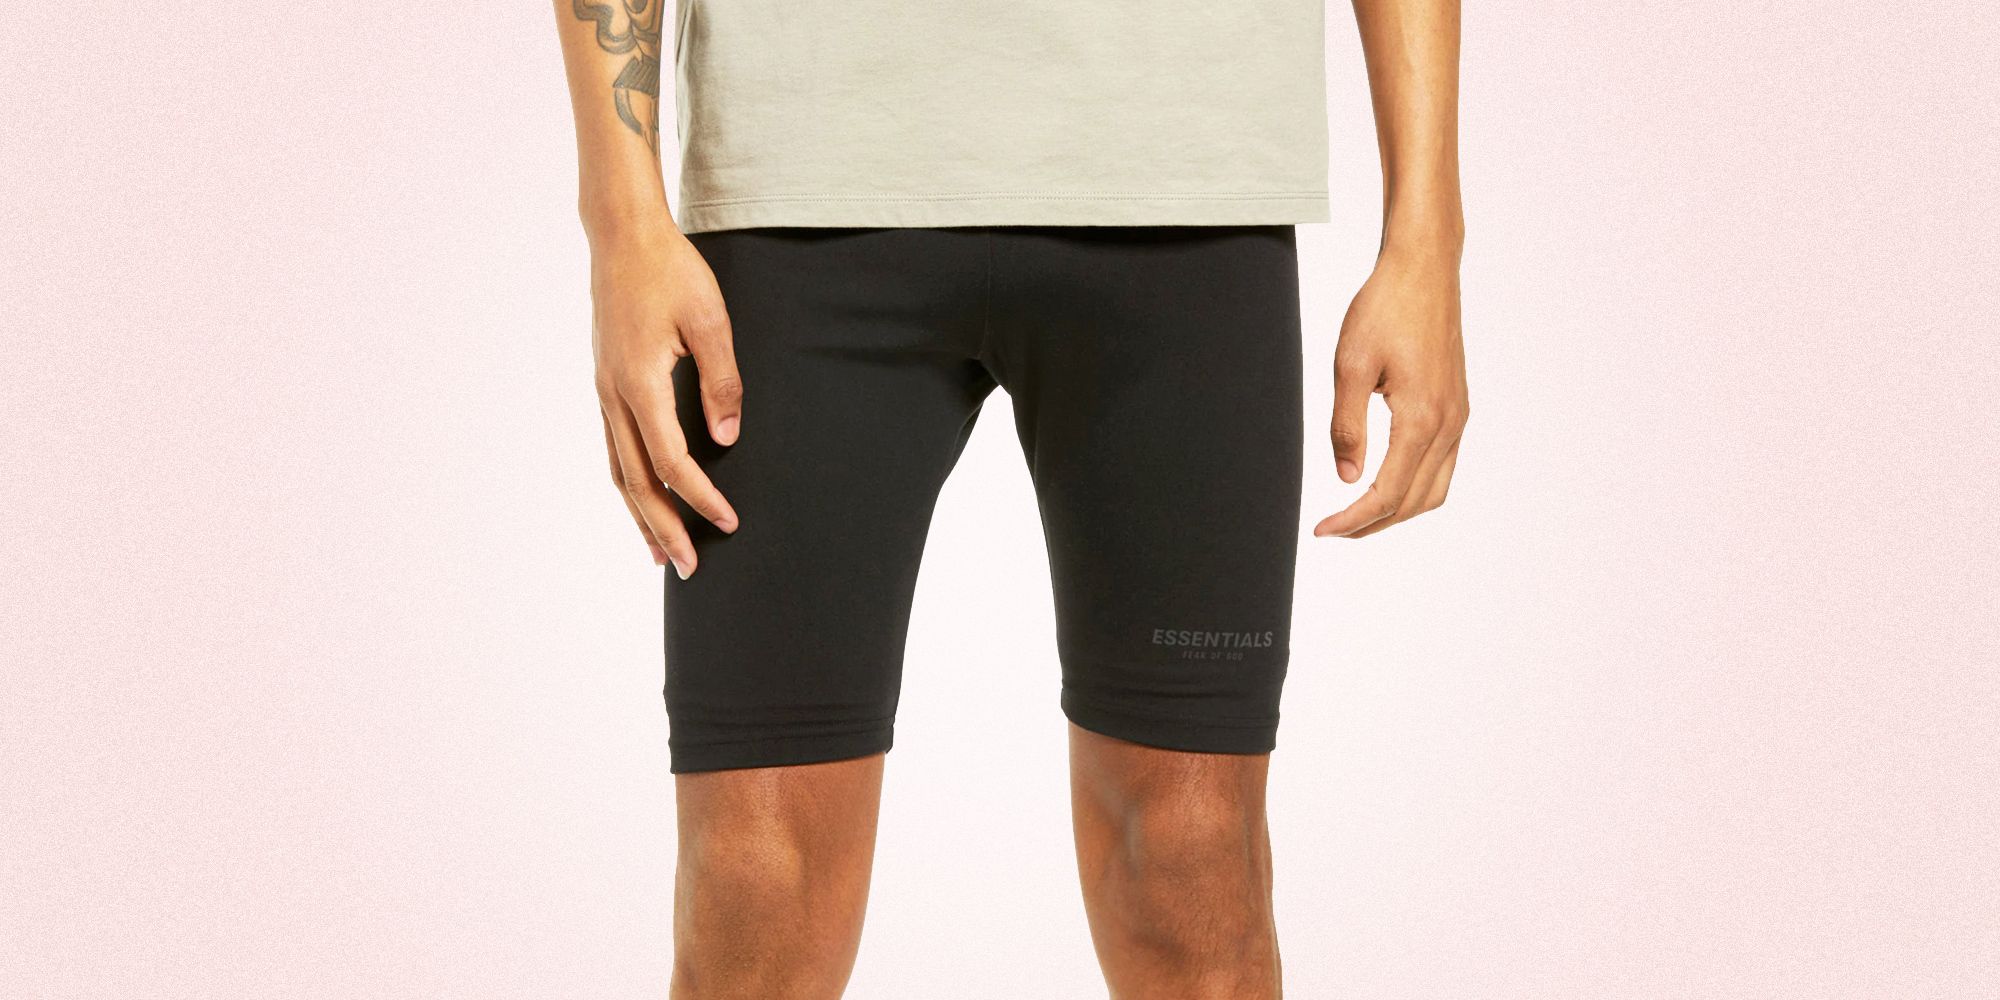 Cycling Shorts With Monogram Belt - Men - OBSOLETES DO NOT TOUCH